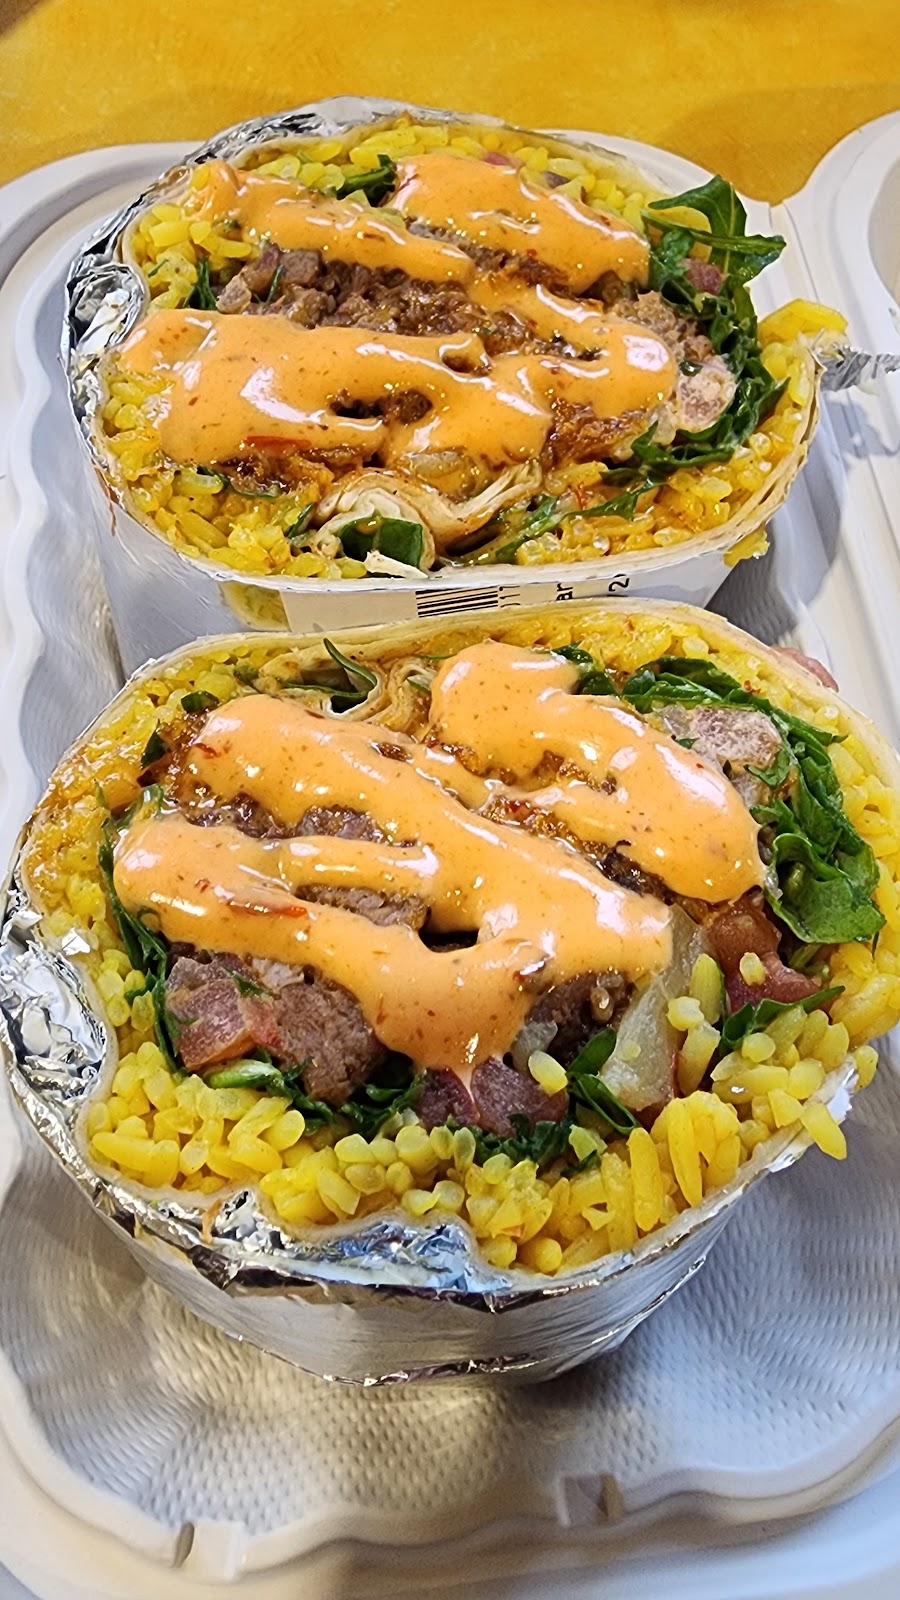 Coliseum Kitchen & Caterers & Fat Boys Burrito Co. | 1660 Old Country Rd, Plainview, NY 11803, USA | Phone: (516) 483-4900